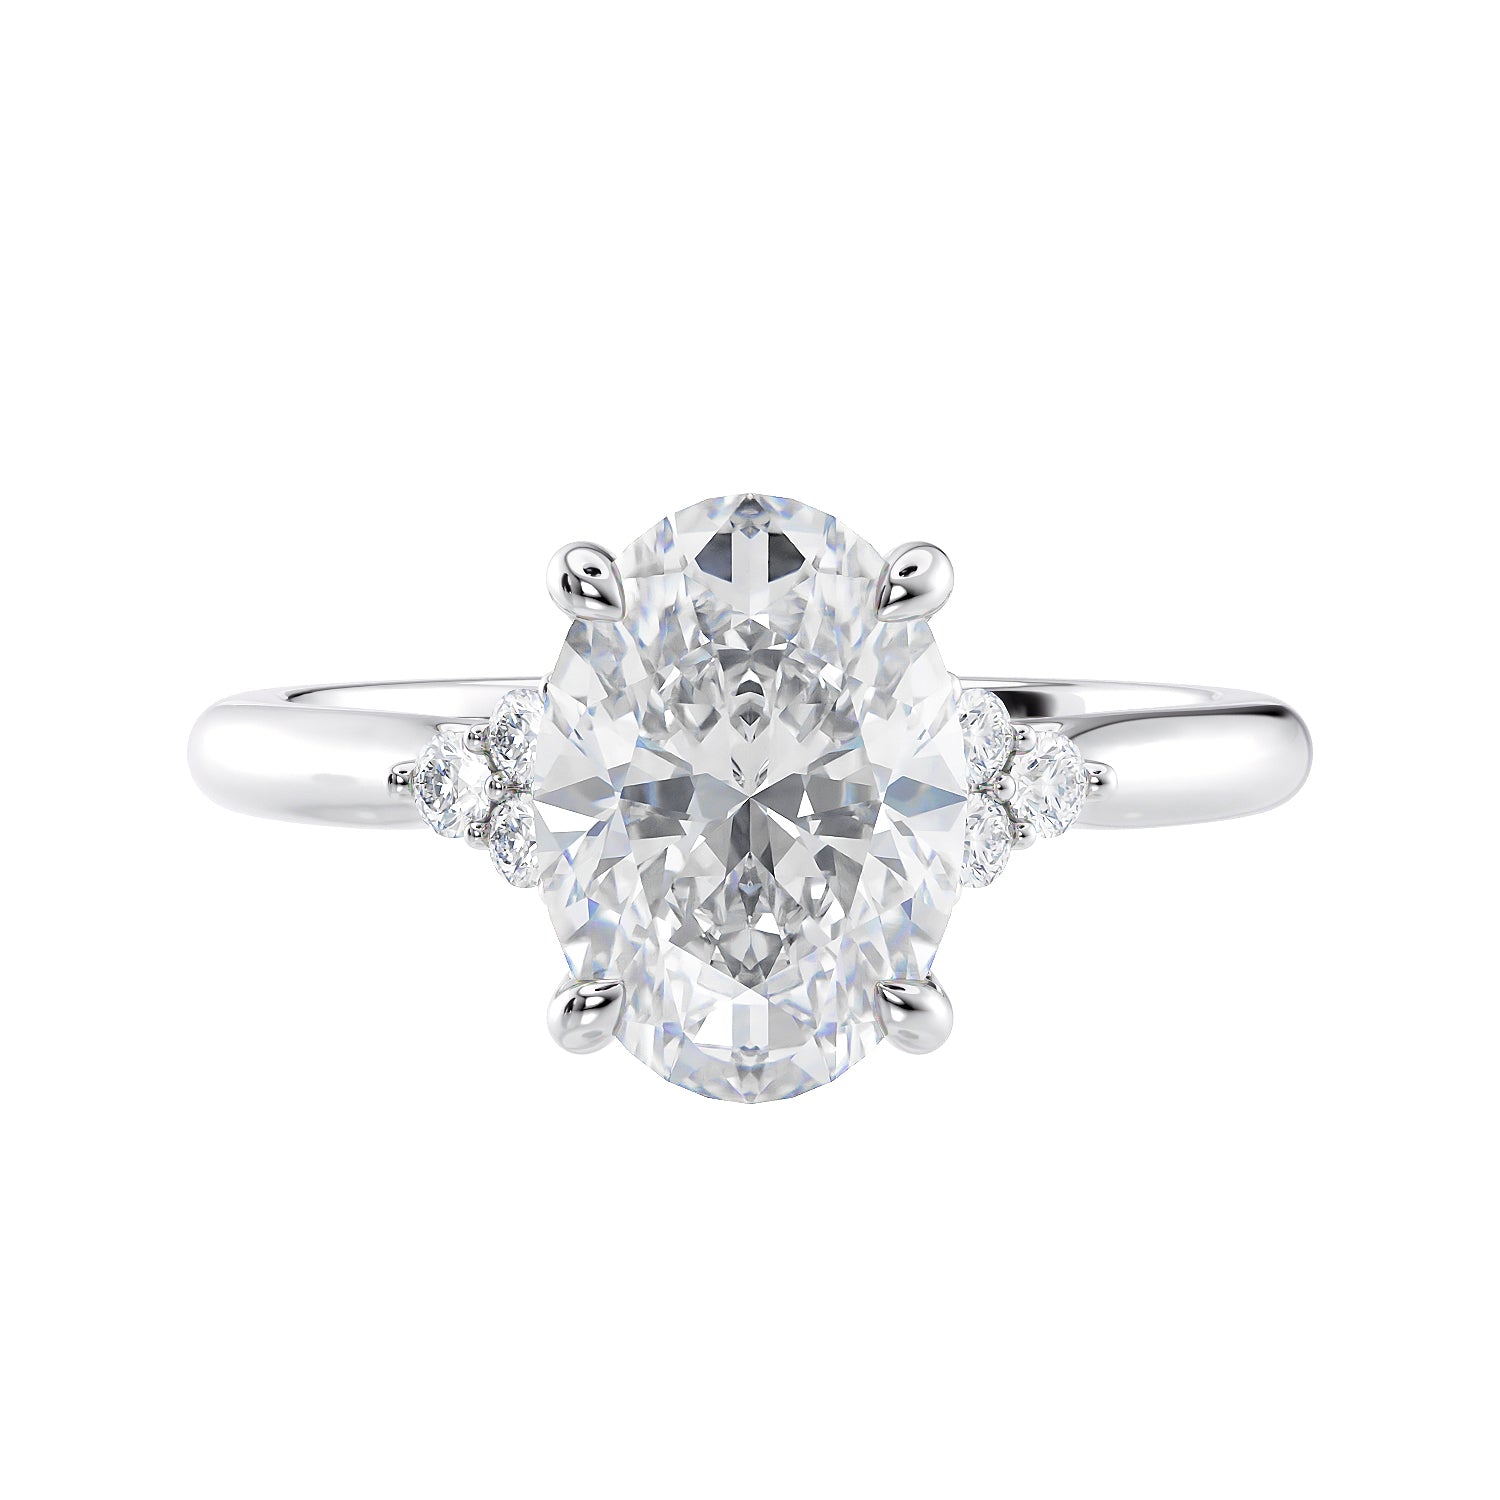 Oval diamond engagement ring with six accent shoulder diamonds 18ct white gold front view.